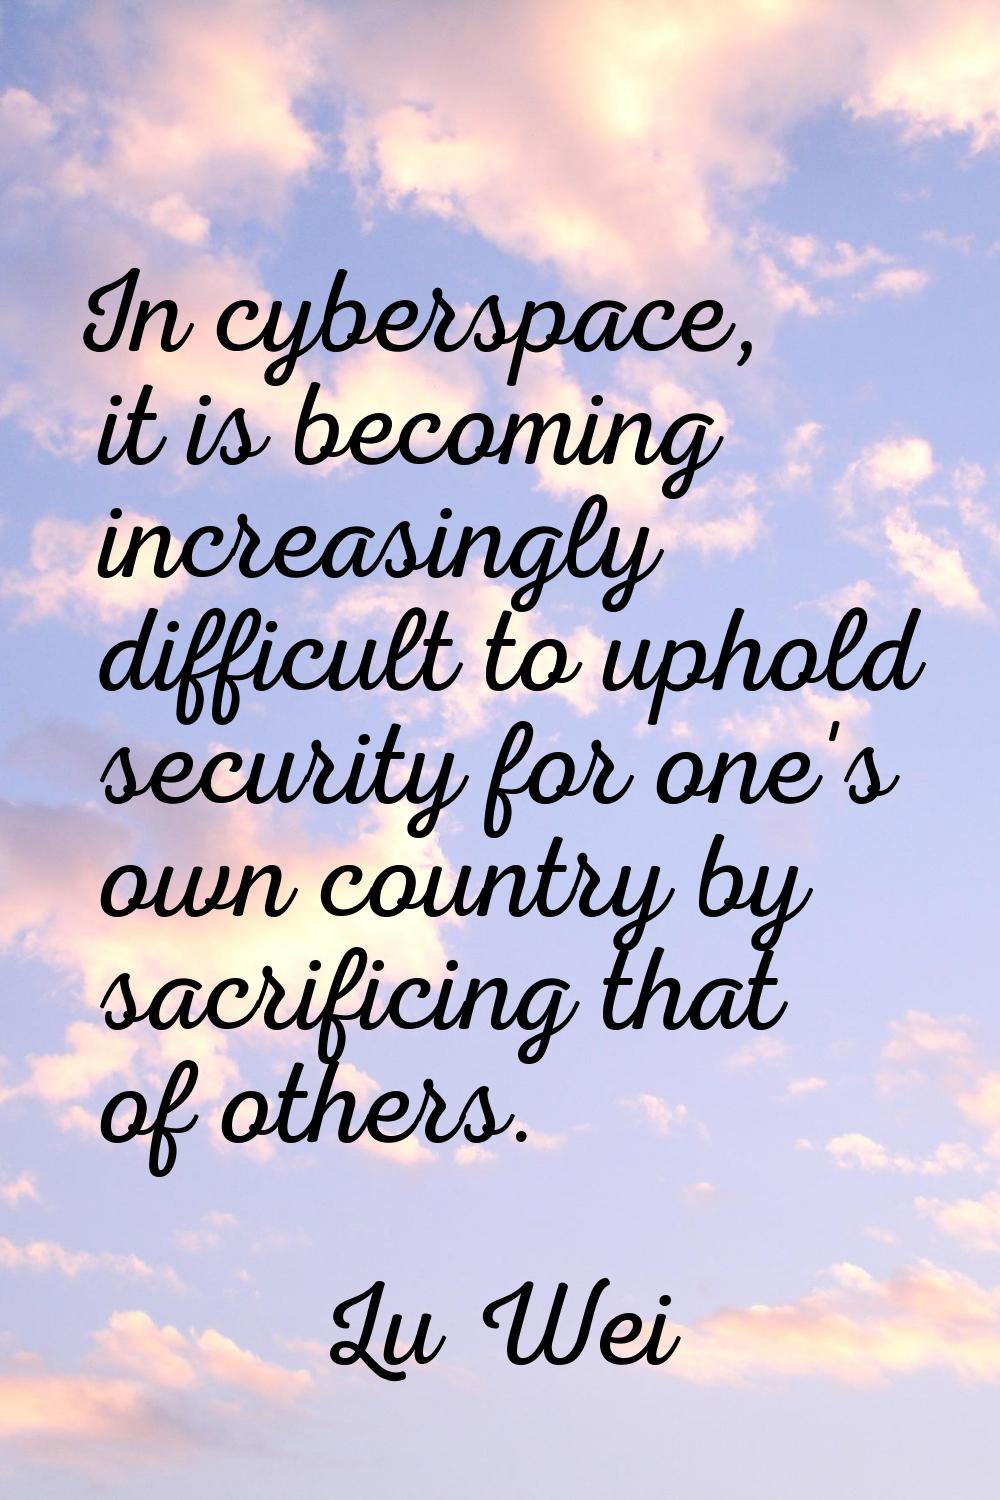 In cyberspace, it is becoming increasingly difficult to uphold security for one's own country by sa